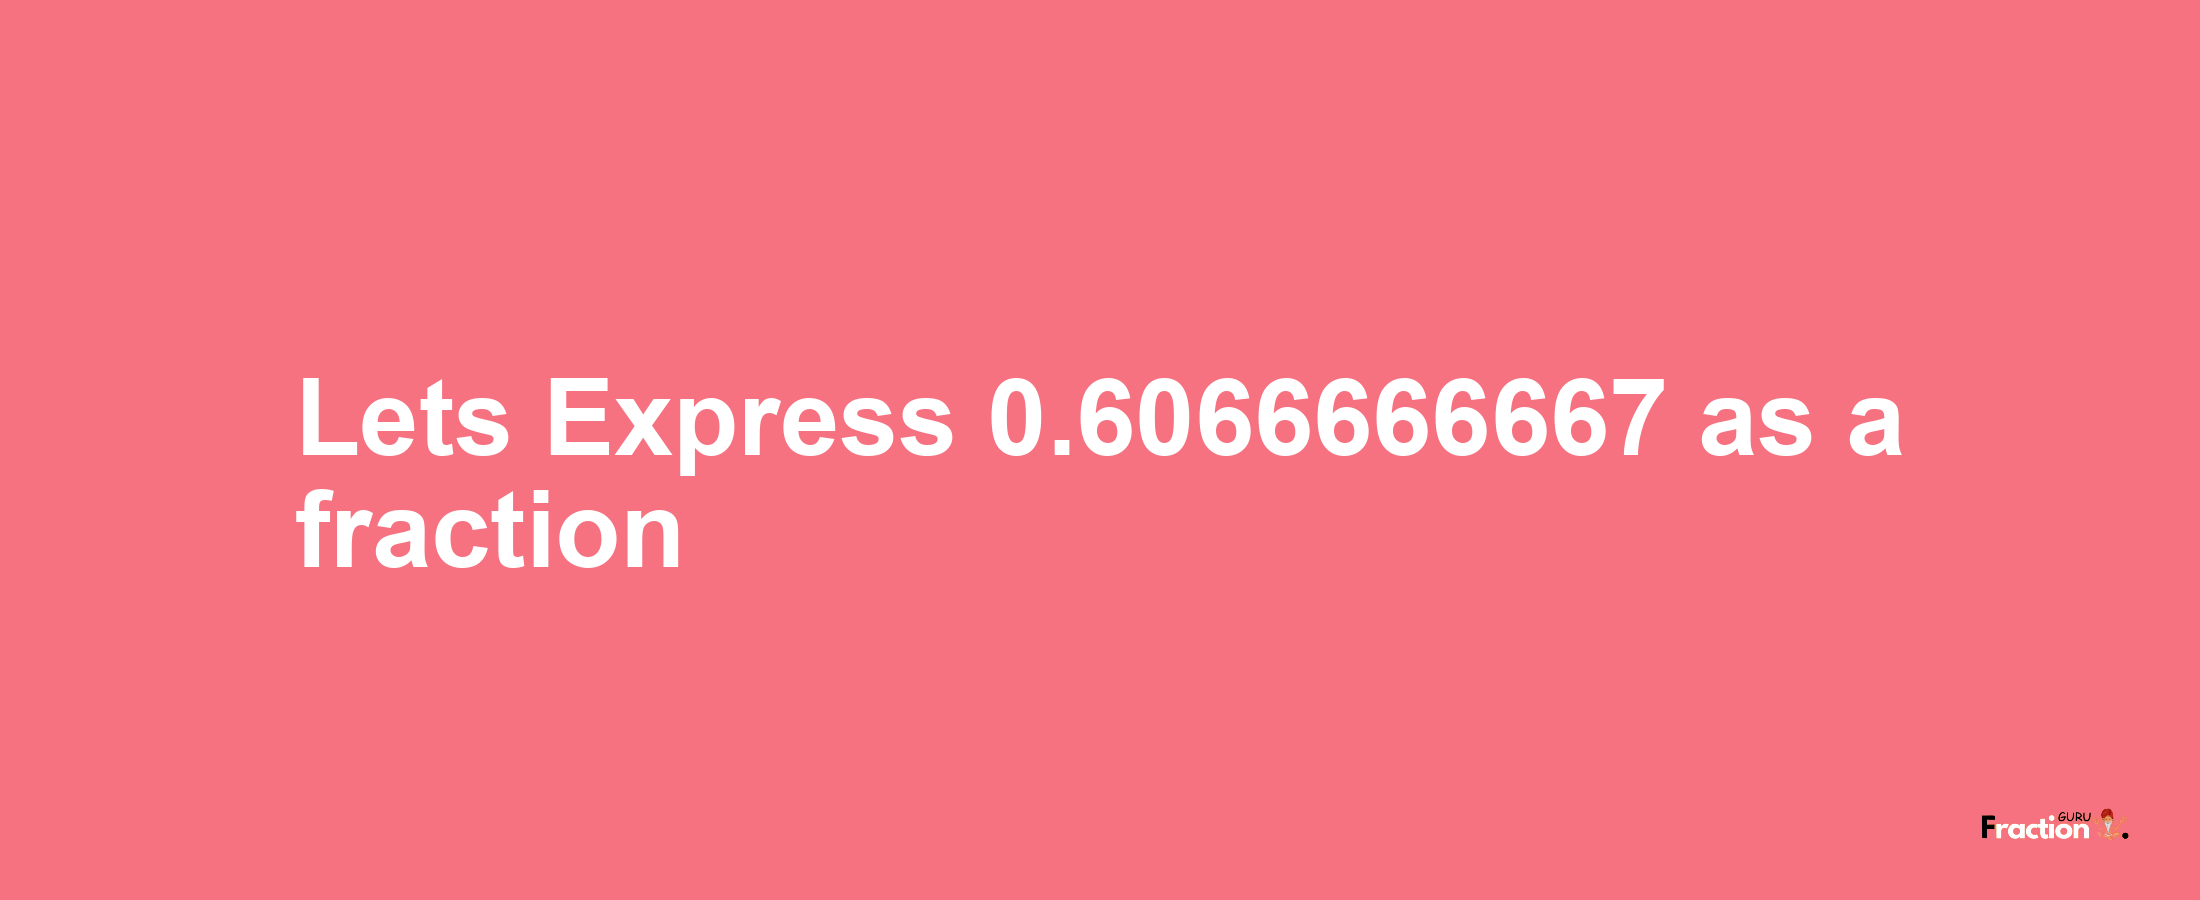 Lets Express 0.6066666667 as afraction